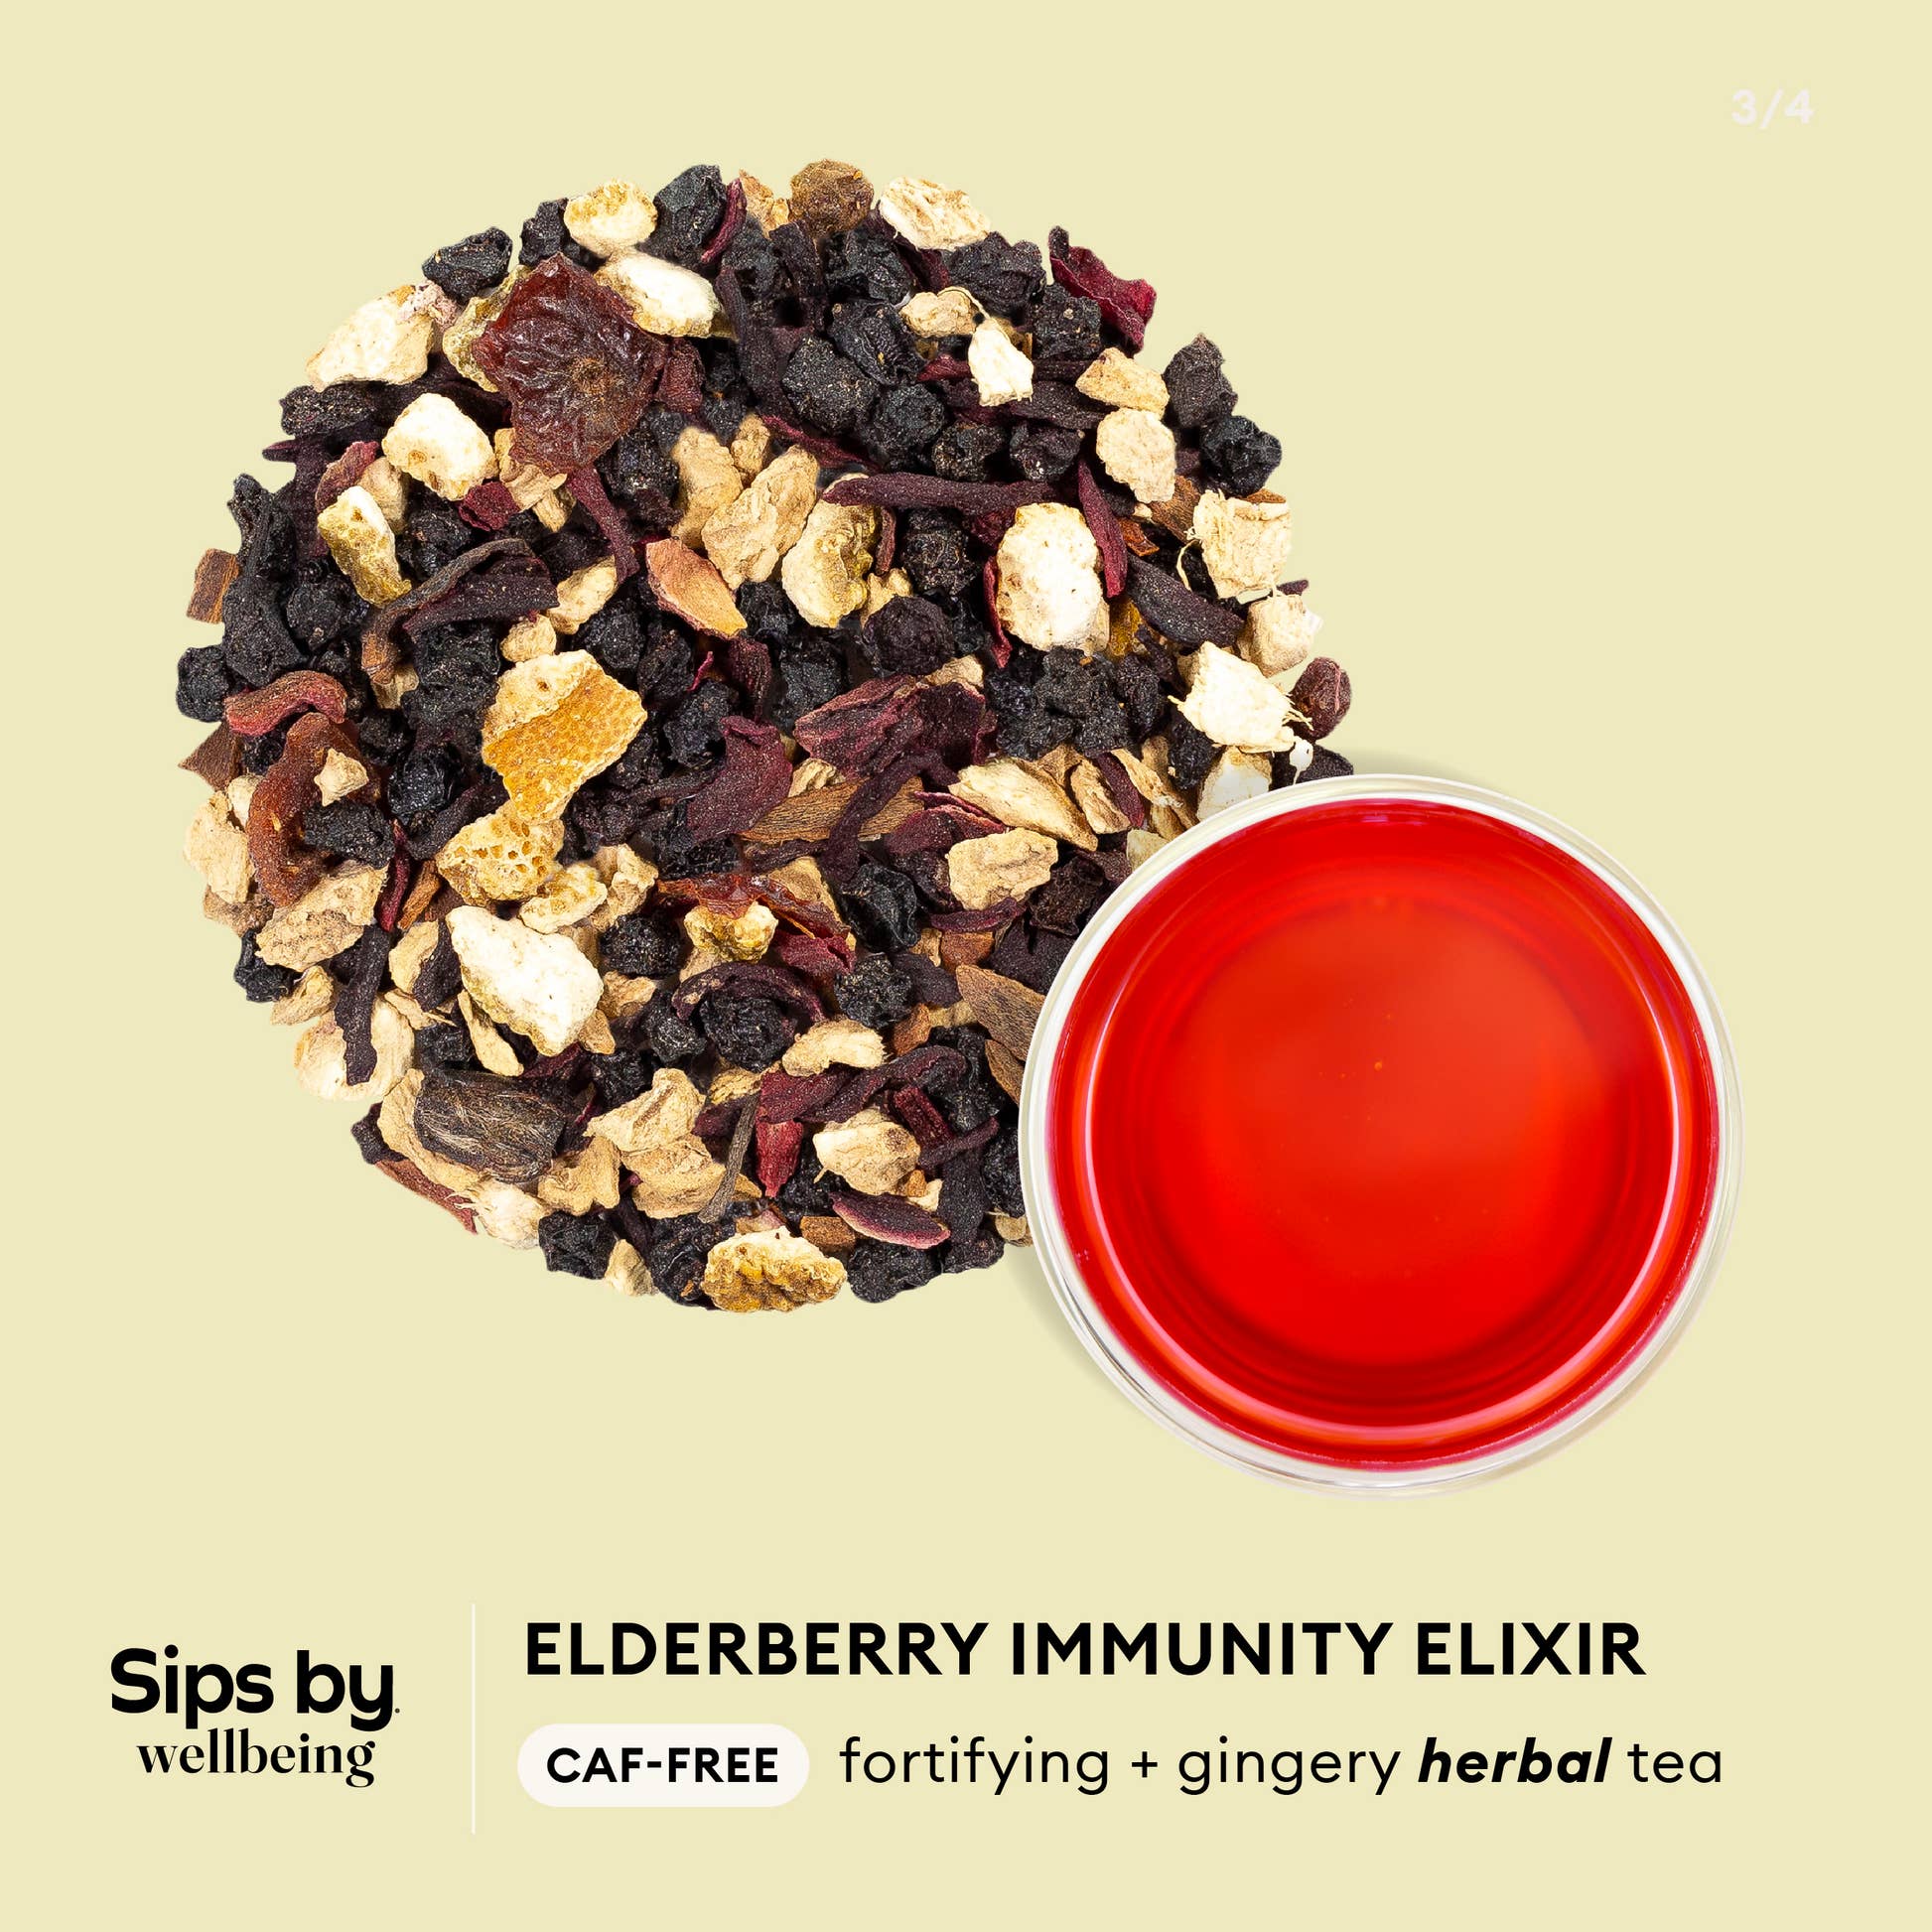 Sips by Wellbeing - Elderberry Immunity Elixir caf-free, fortifying + gingery infographic